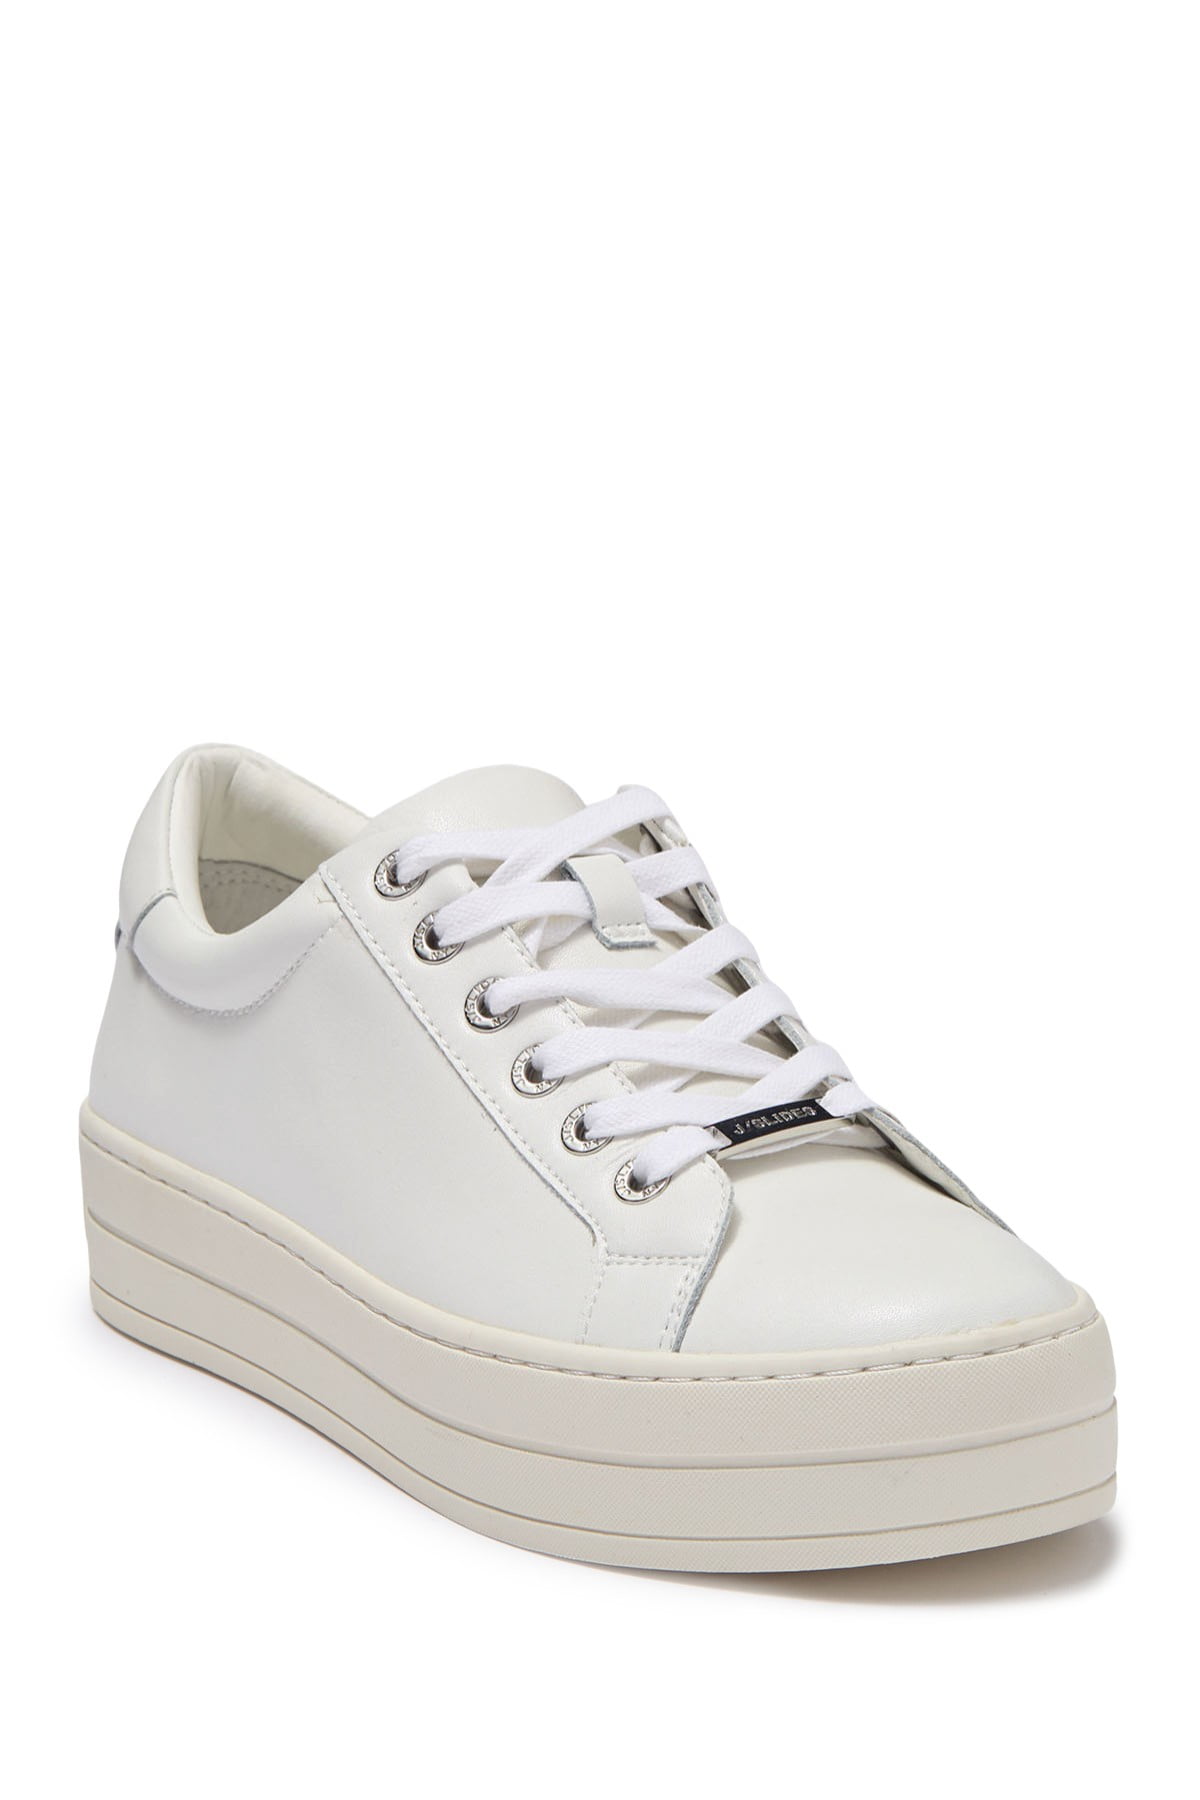 tenis harper white chunky sneaker dad shoes